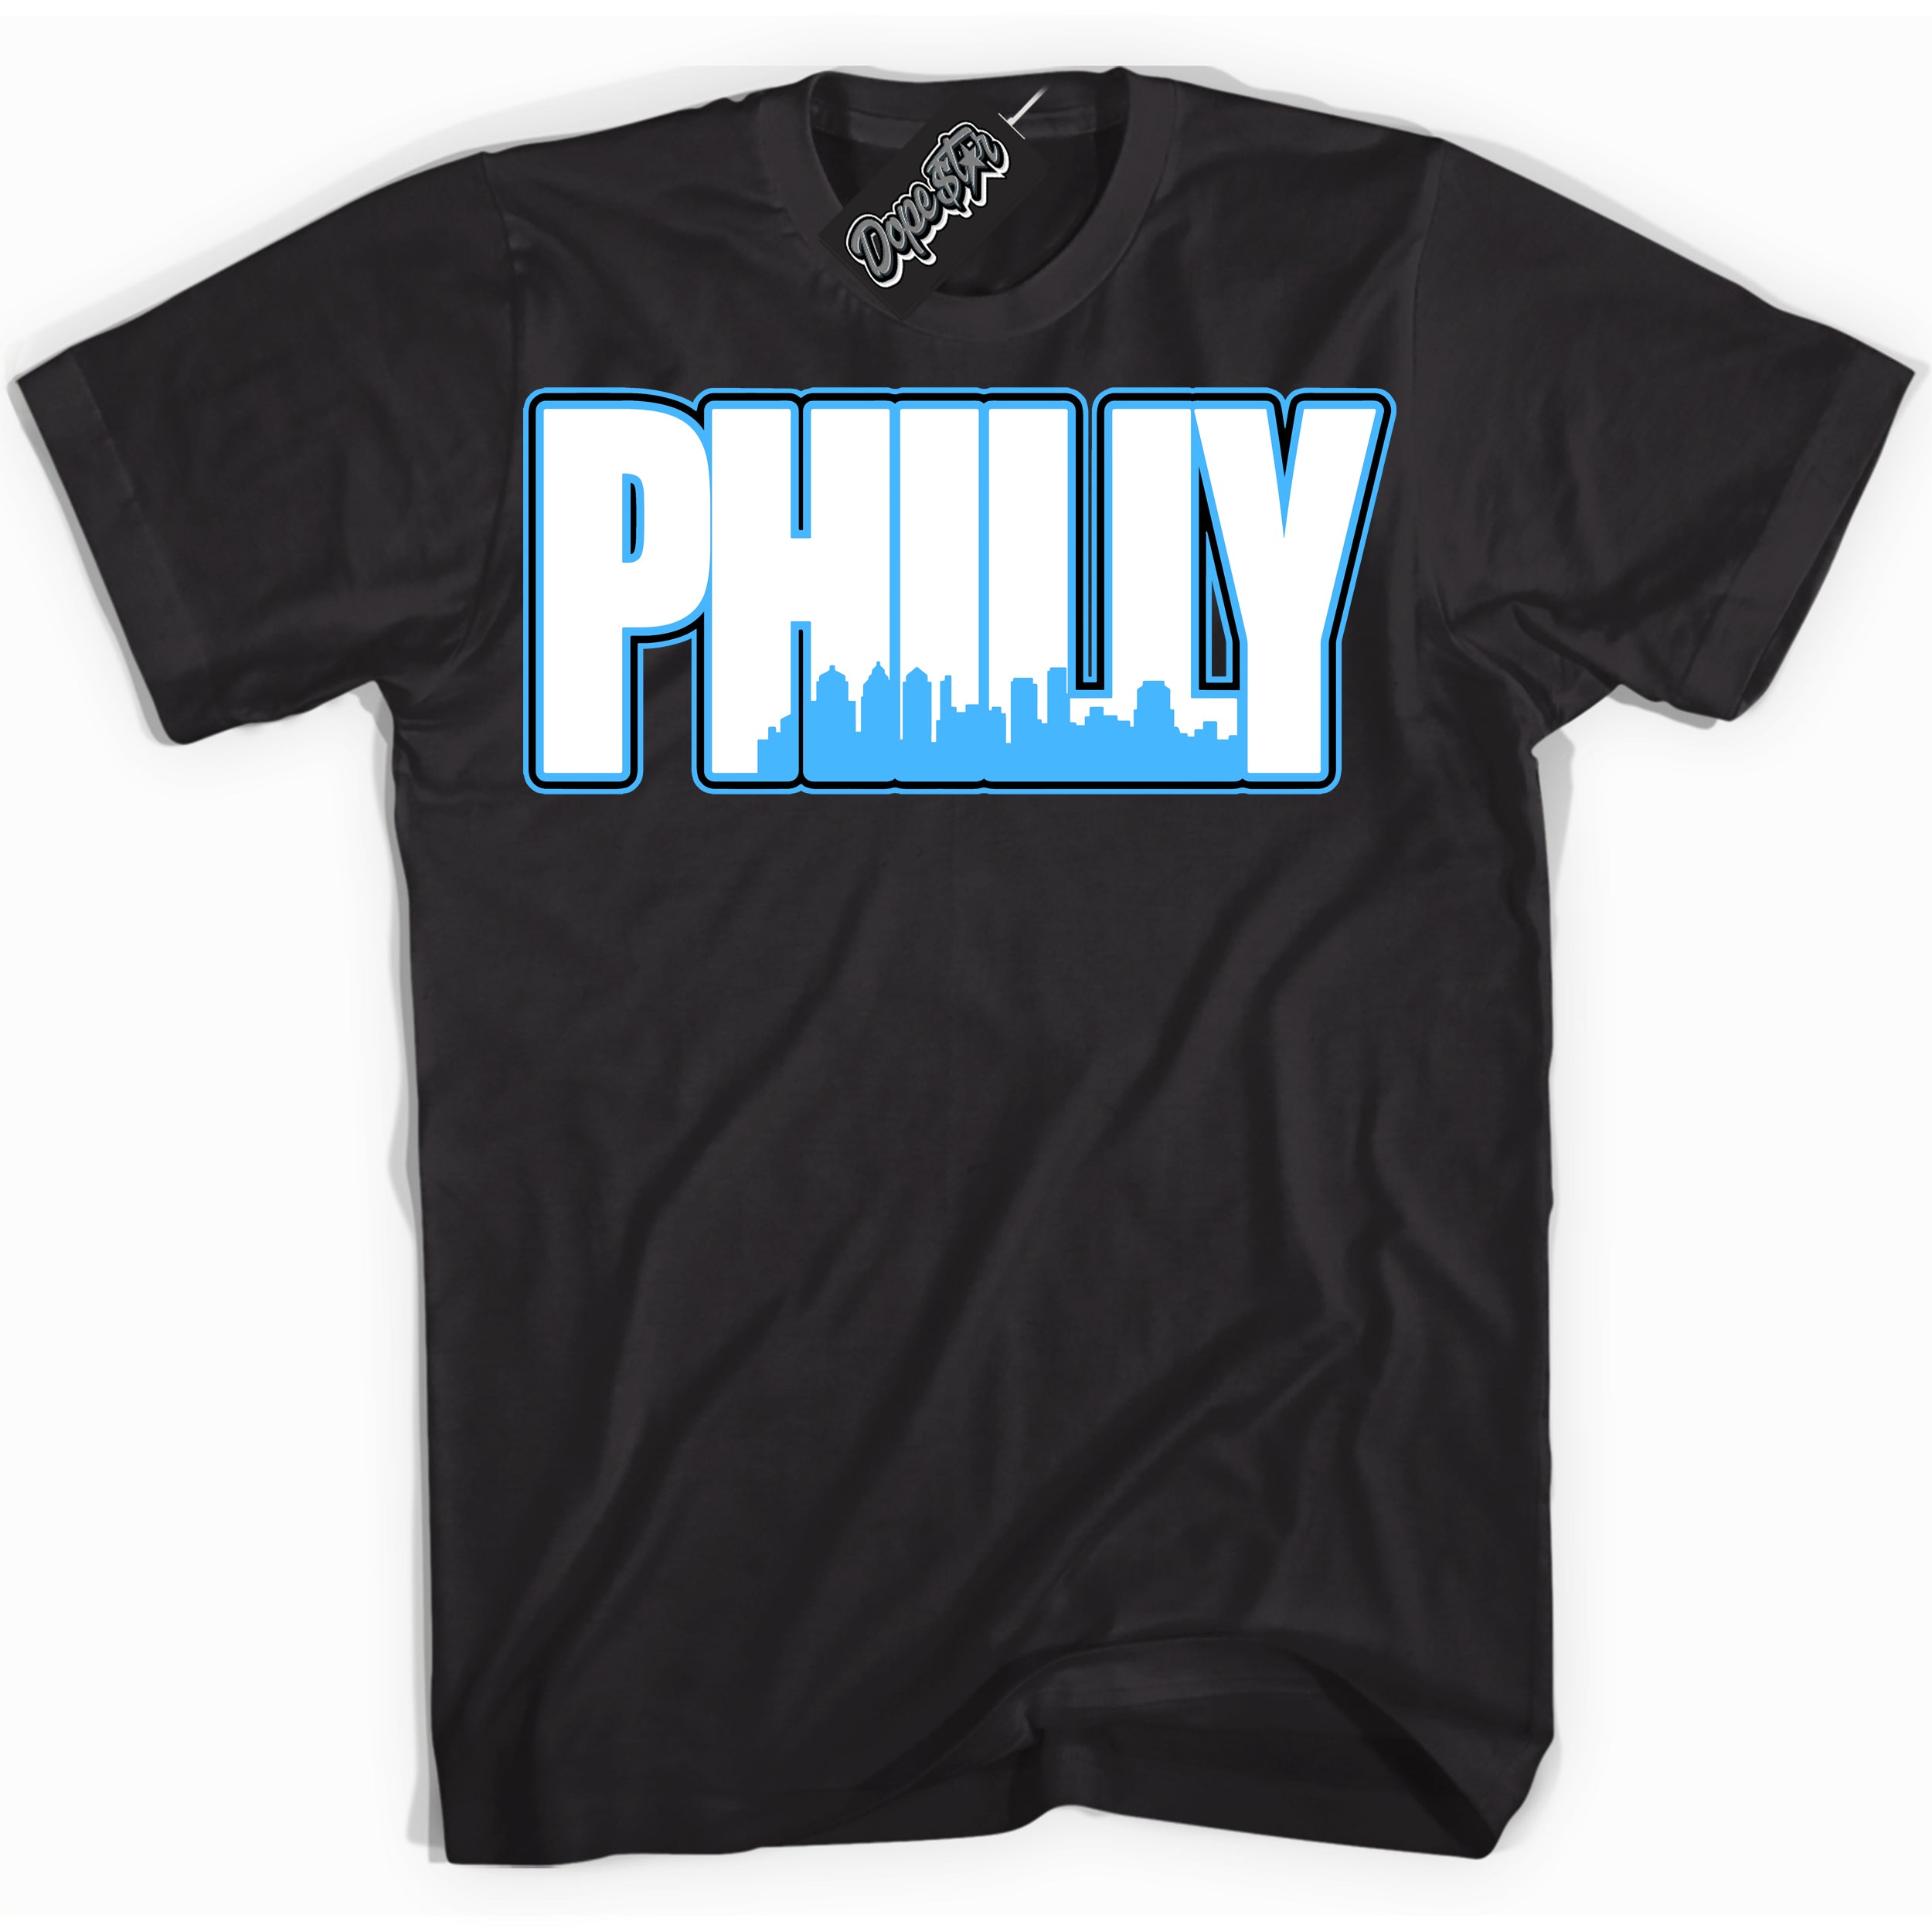 Cool Black graphic tee with “ Philly ” design, that perfectly matches Powder Blue 9s sneakers 